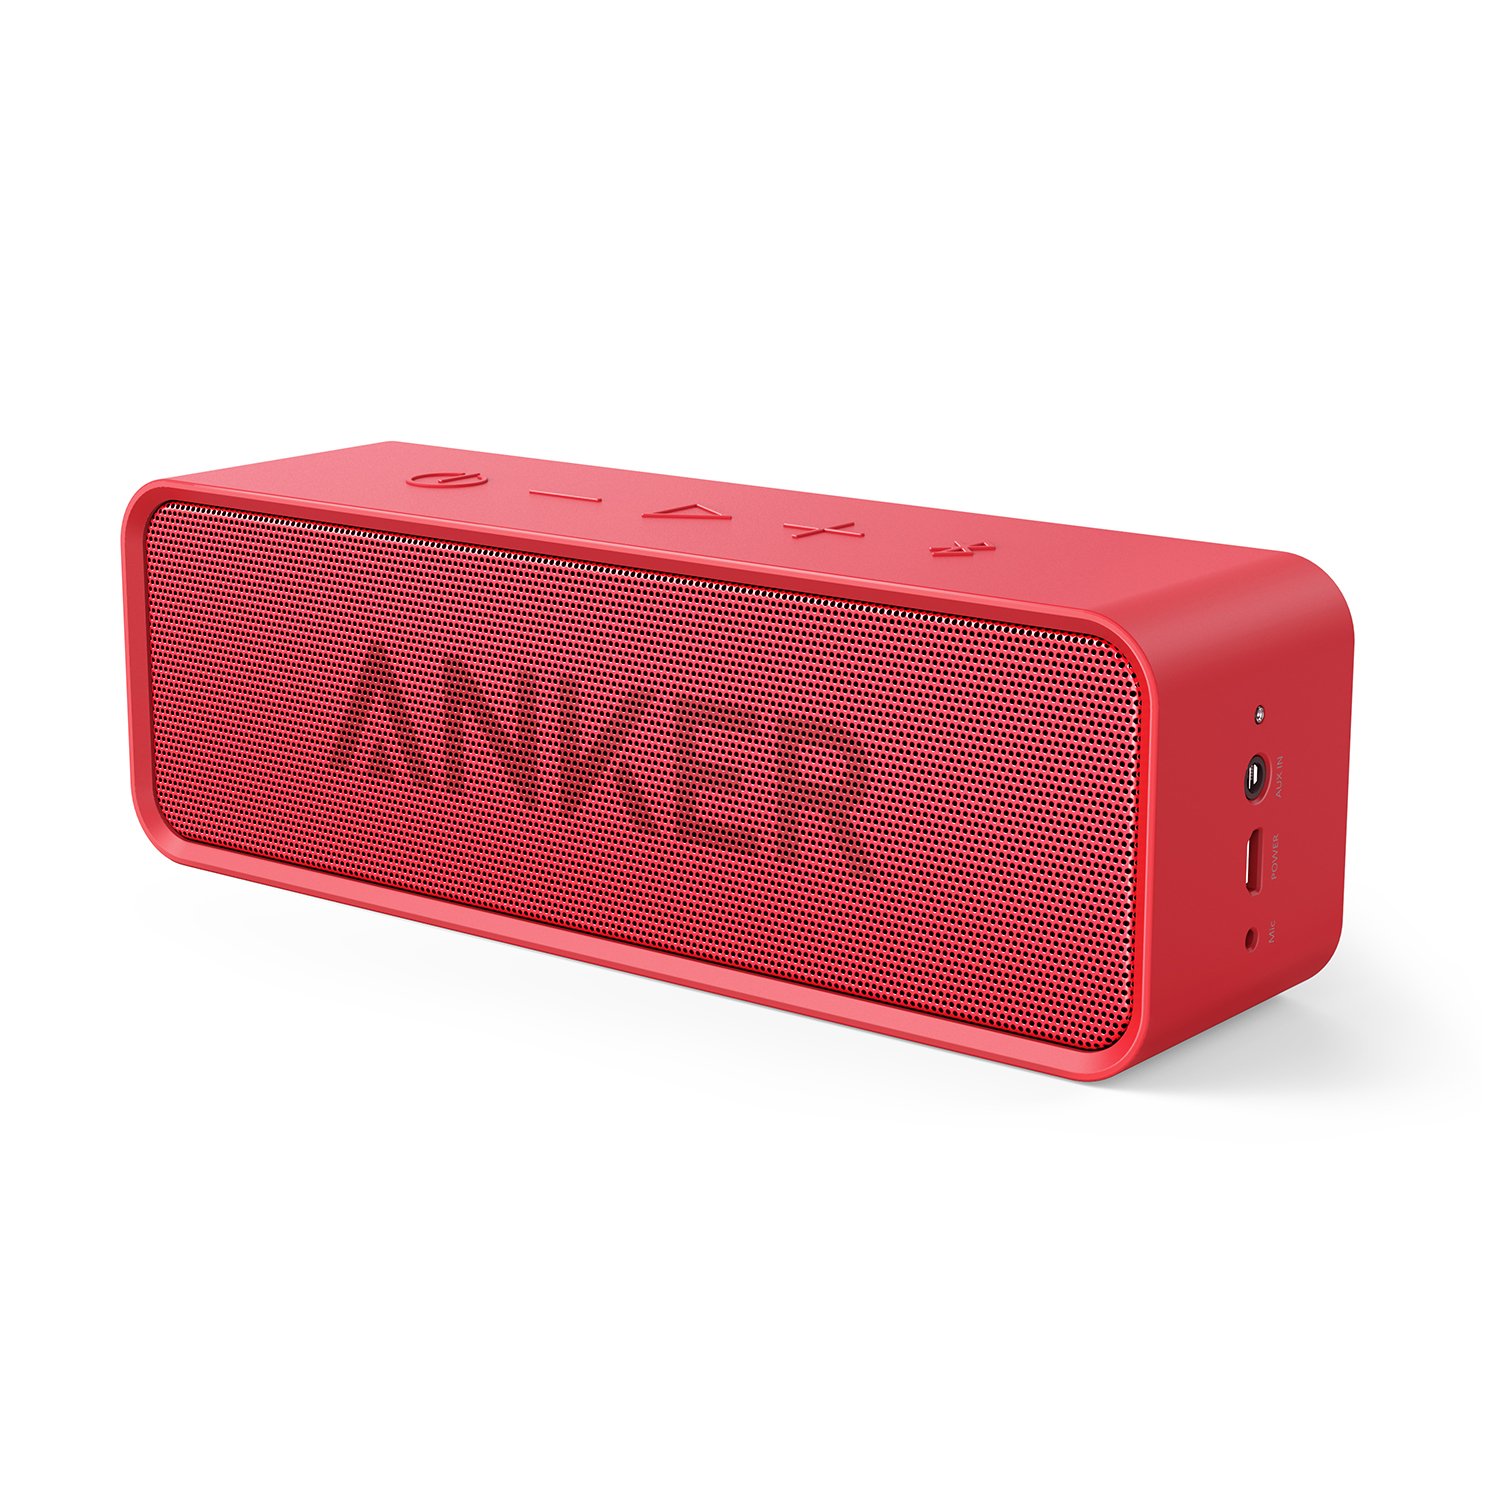 Book Cover Anker Soundcore 24-Hour Playtime Bluetooth Speaker with 10W Limited Output, Stereo Sound, Rich Bass, 66 ft Bluetooth Range, Built-in Mic. Portable Wireless Speaker for iPhone, Samsung, and More - Red Red Speaker